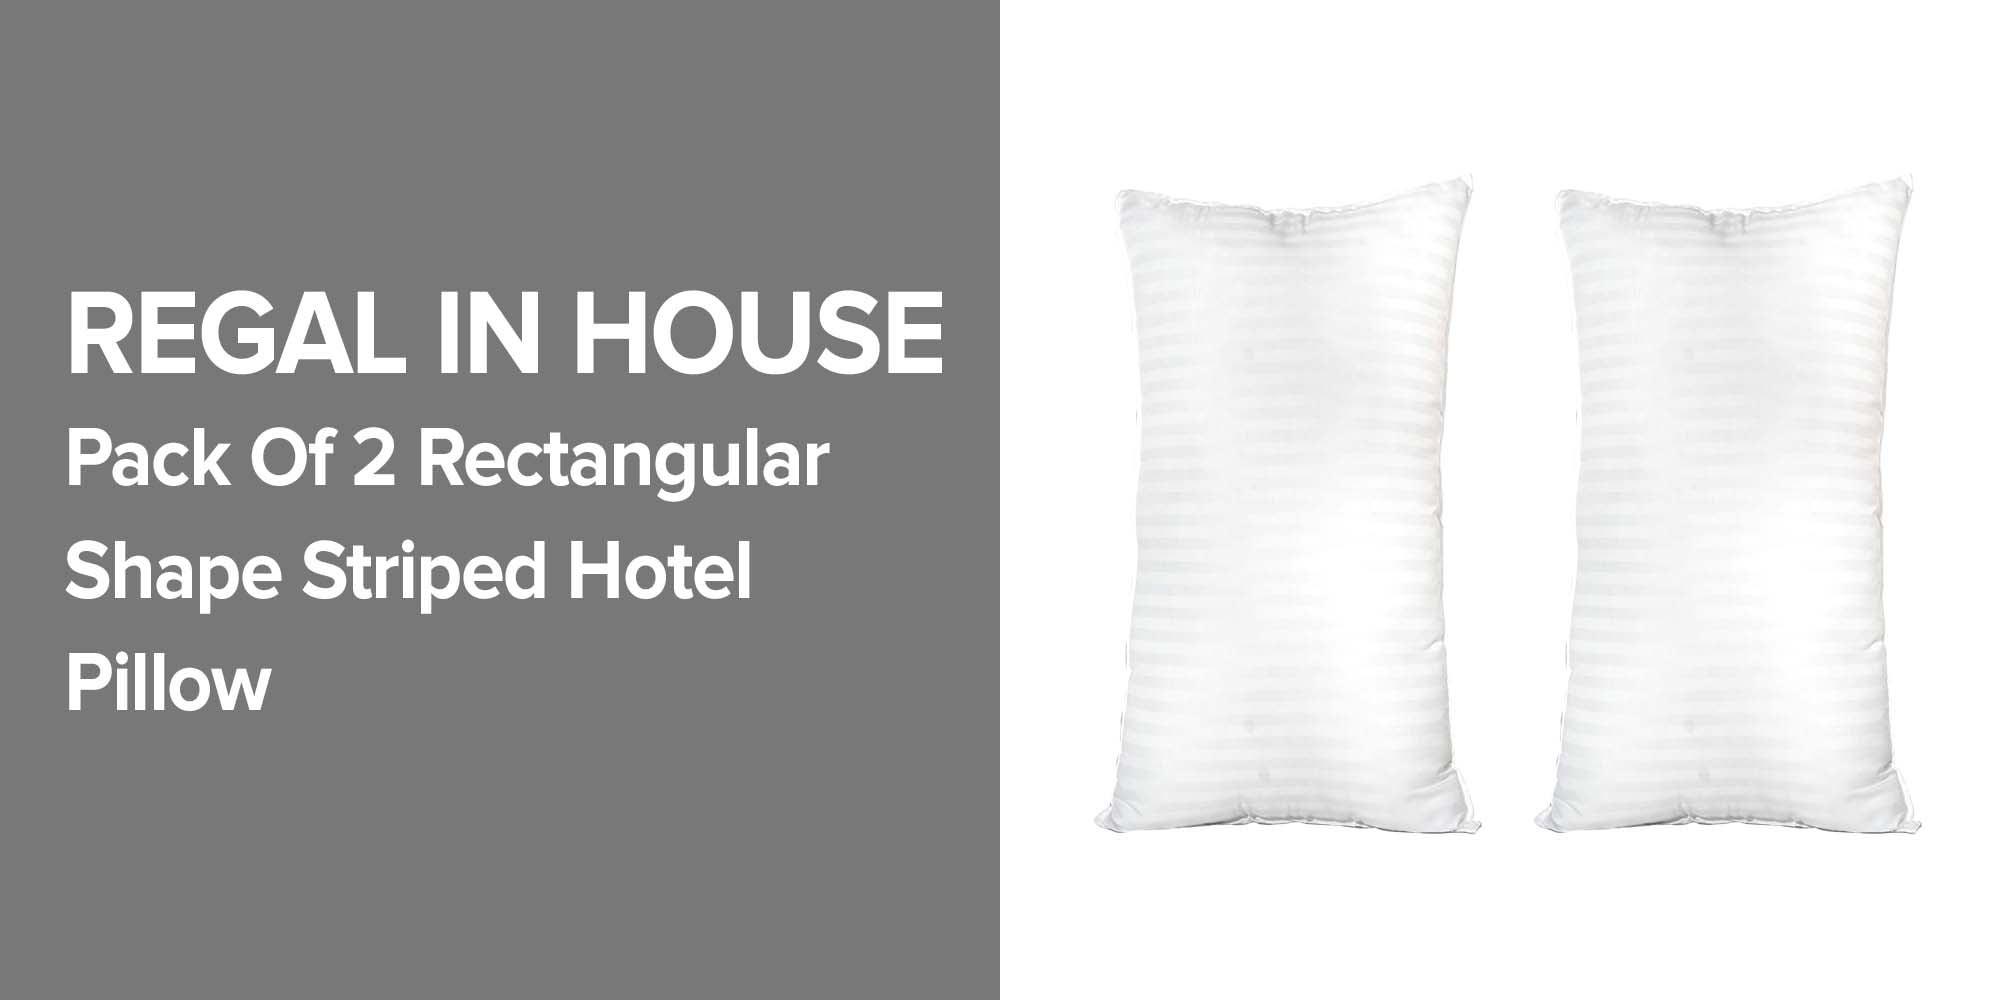 Set of 2-Pieces of Hotel Pillows, for Back, Neck, and Shoulder Support Soft Fluffy Stripe Hotel Pillows Microfiber White 75x50cm